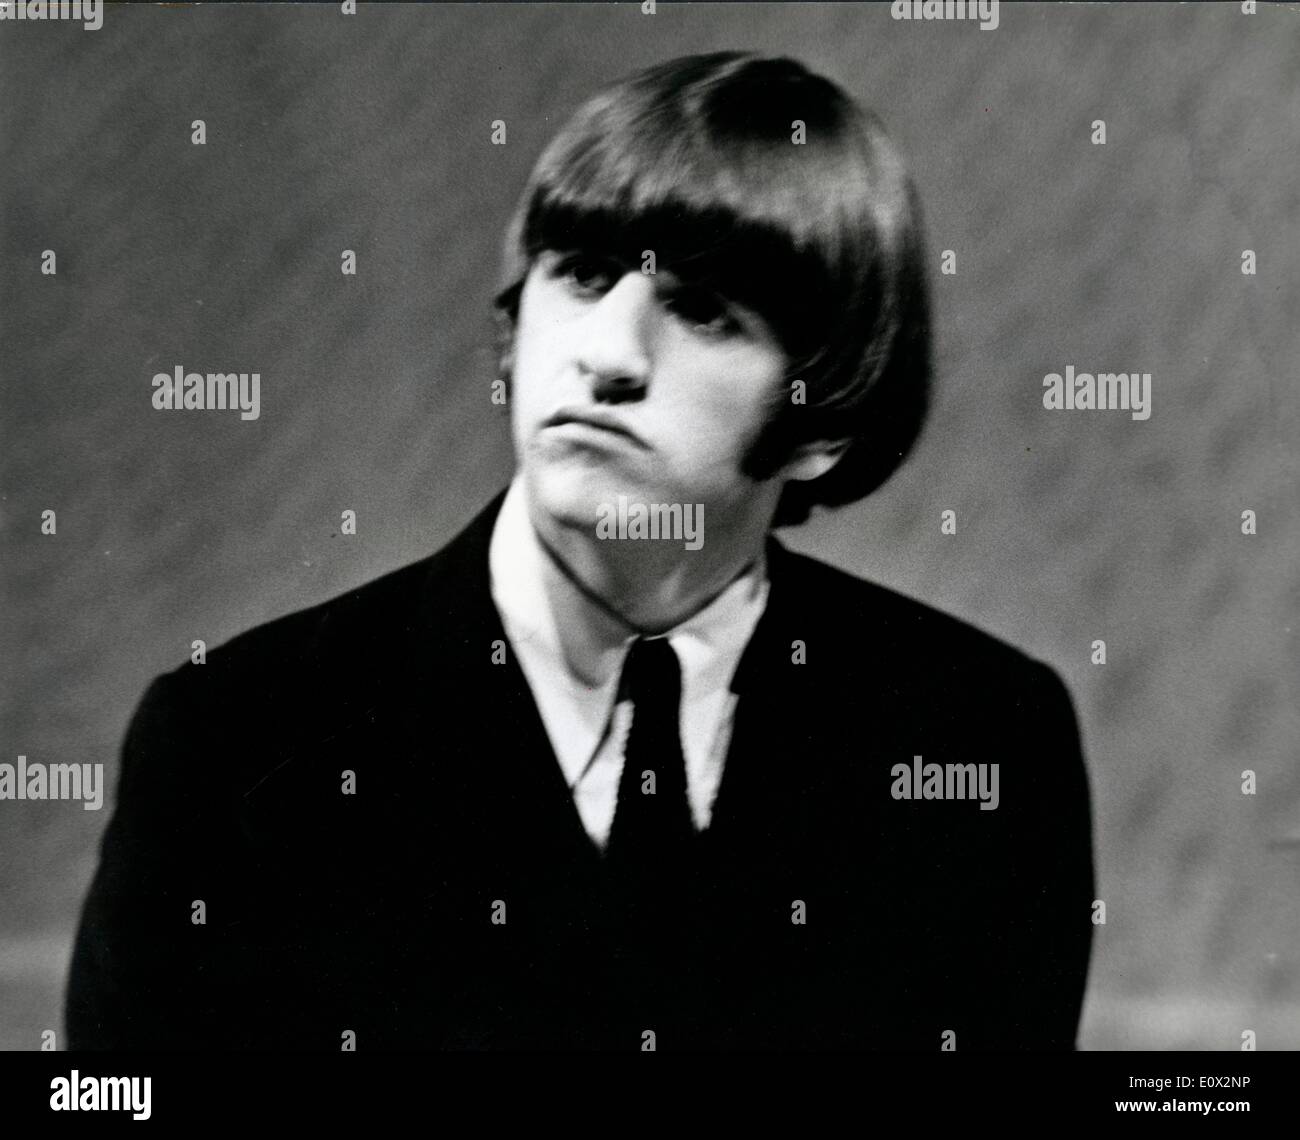 Member of the Beatles Ringo Starr in a suit and tie Stock Photo